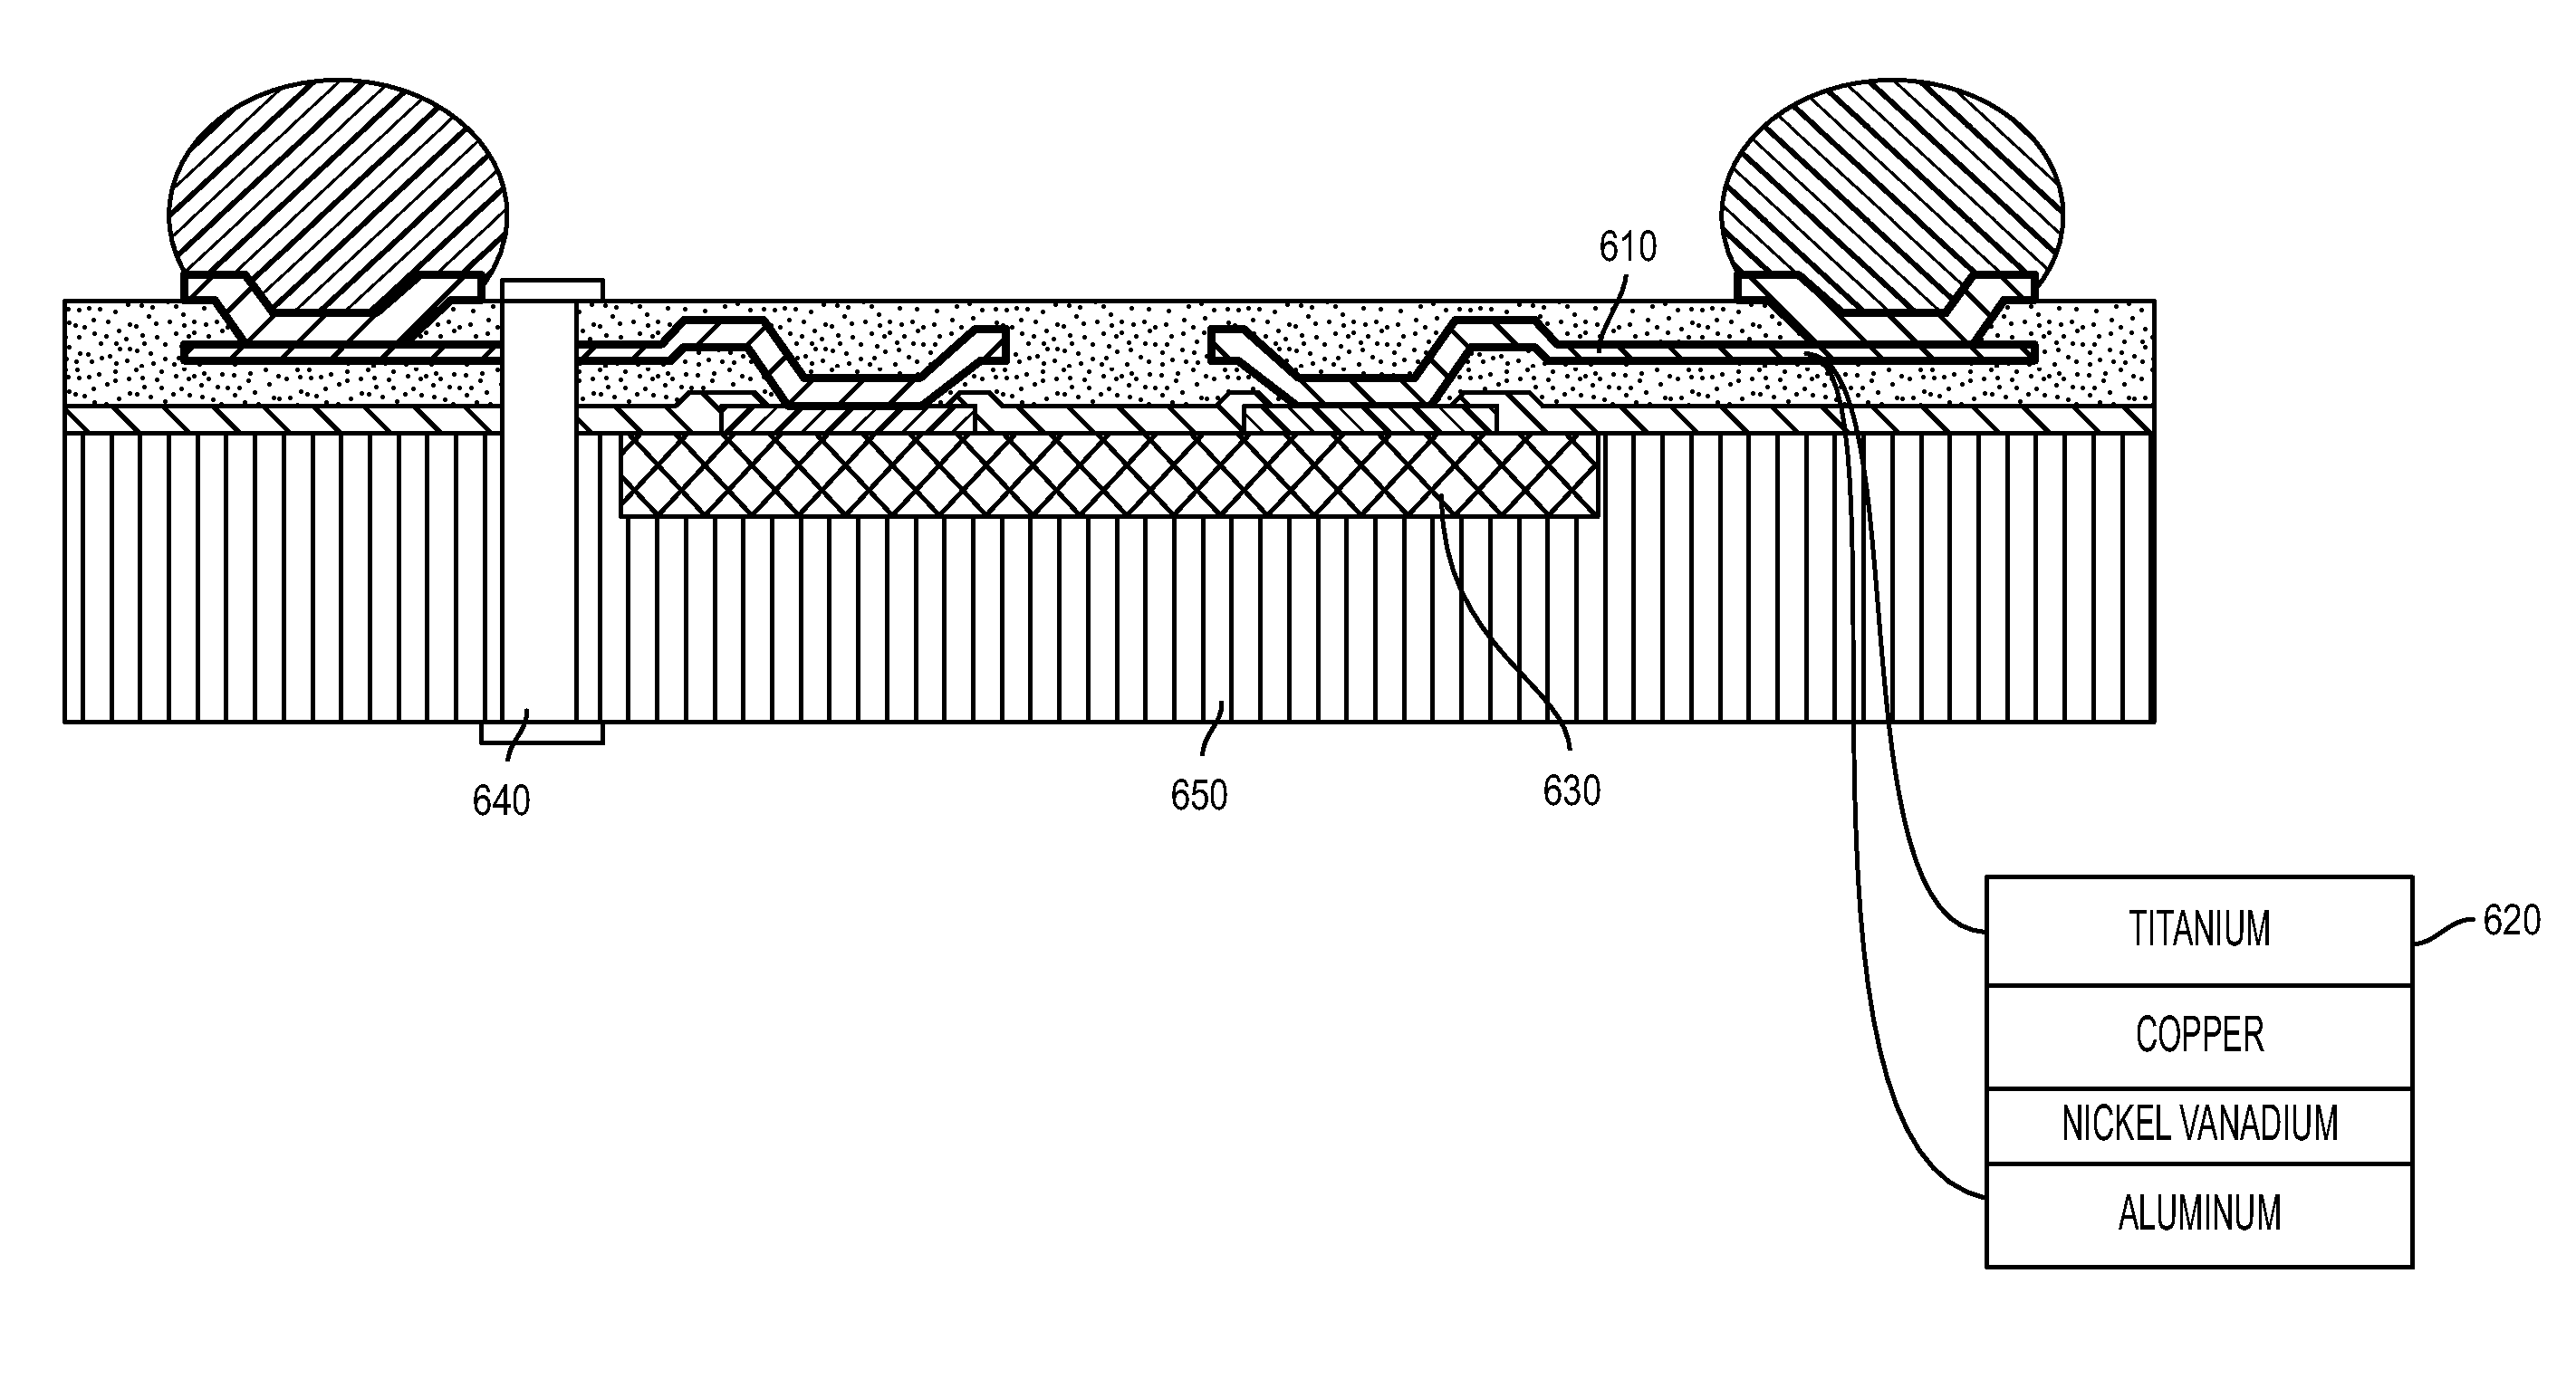 Thin film structure for high density inductors and redistribution in wafer level packaging